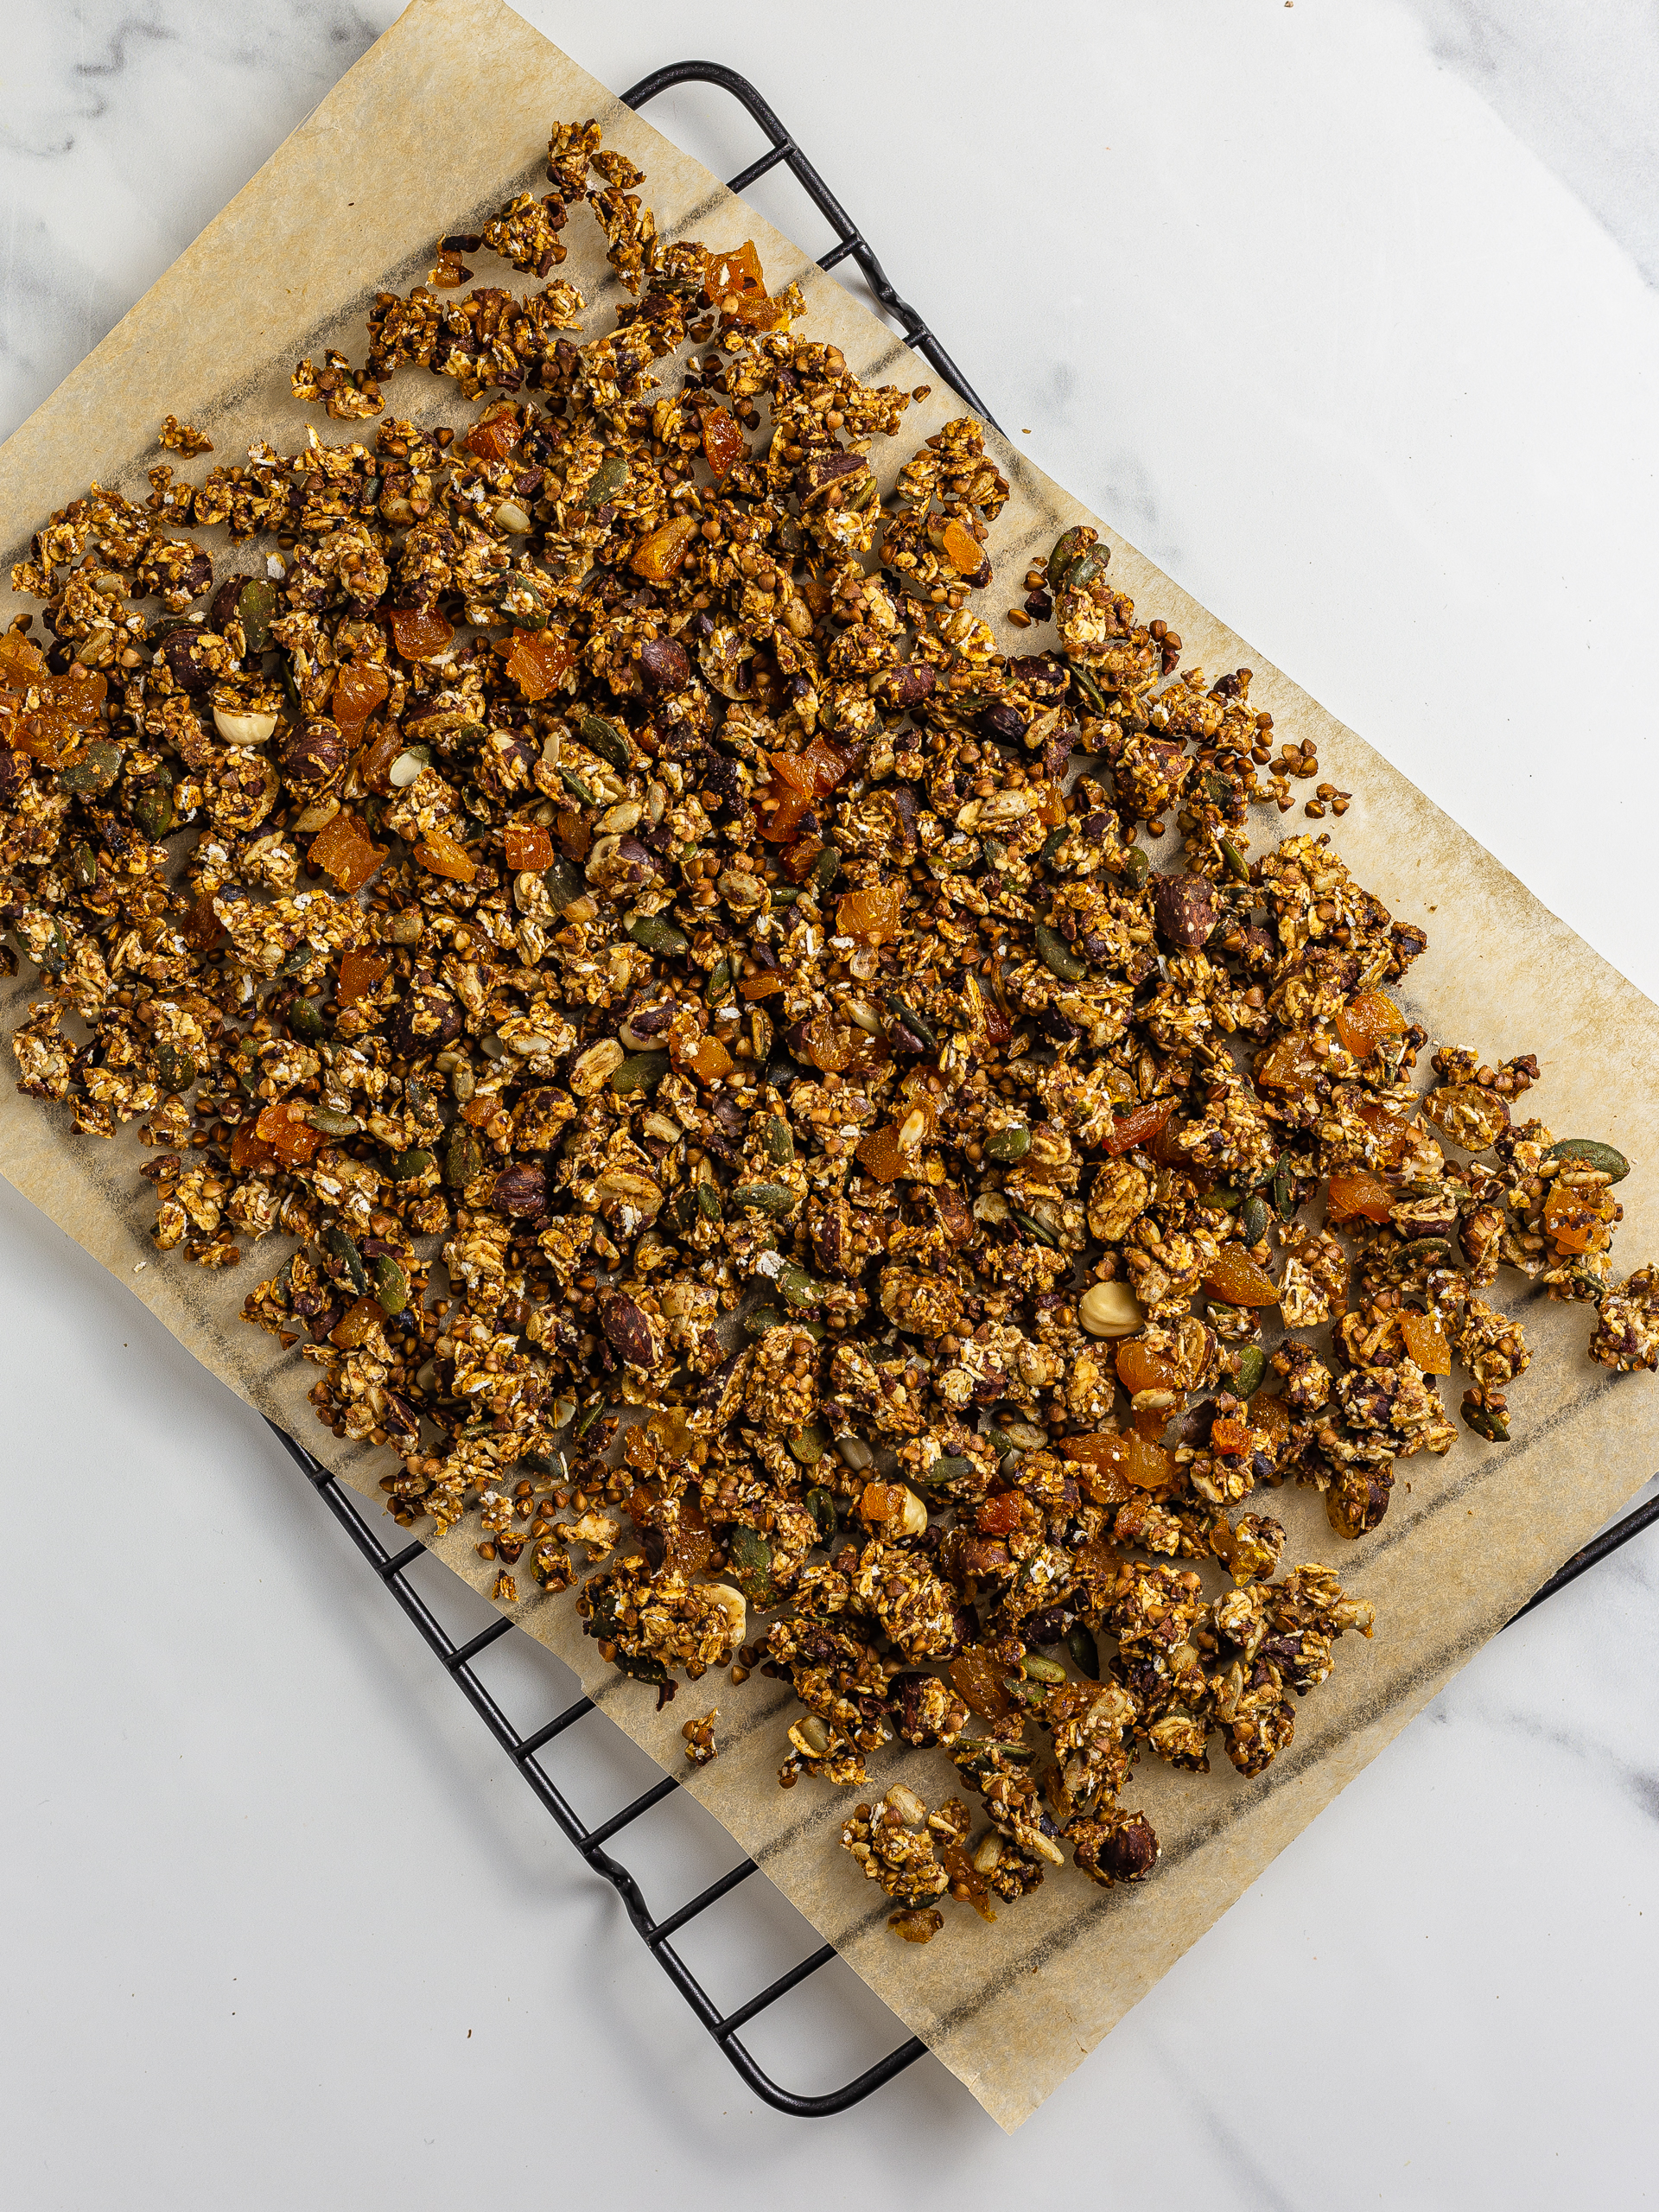 oven-baked granola cooling on a wire rack